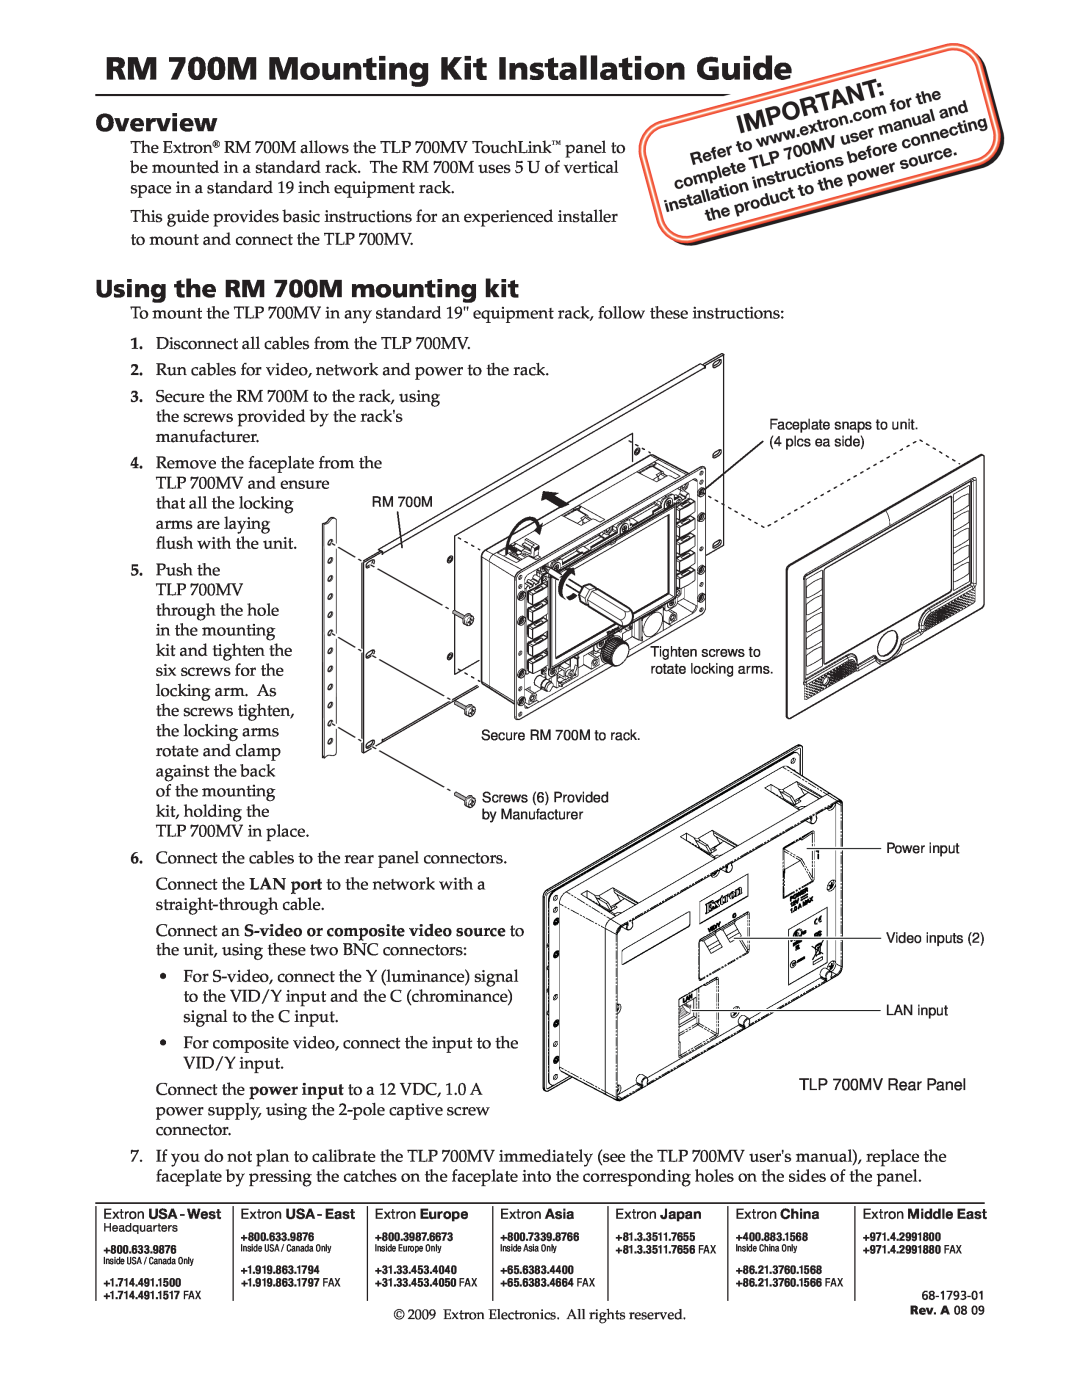 Extron electronic user manual RM 700M Mounting Kit Installation Guide, Overview, Using the RM 700M mounting kit 